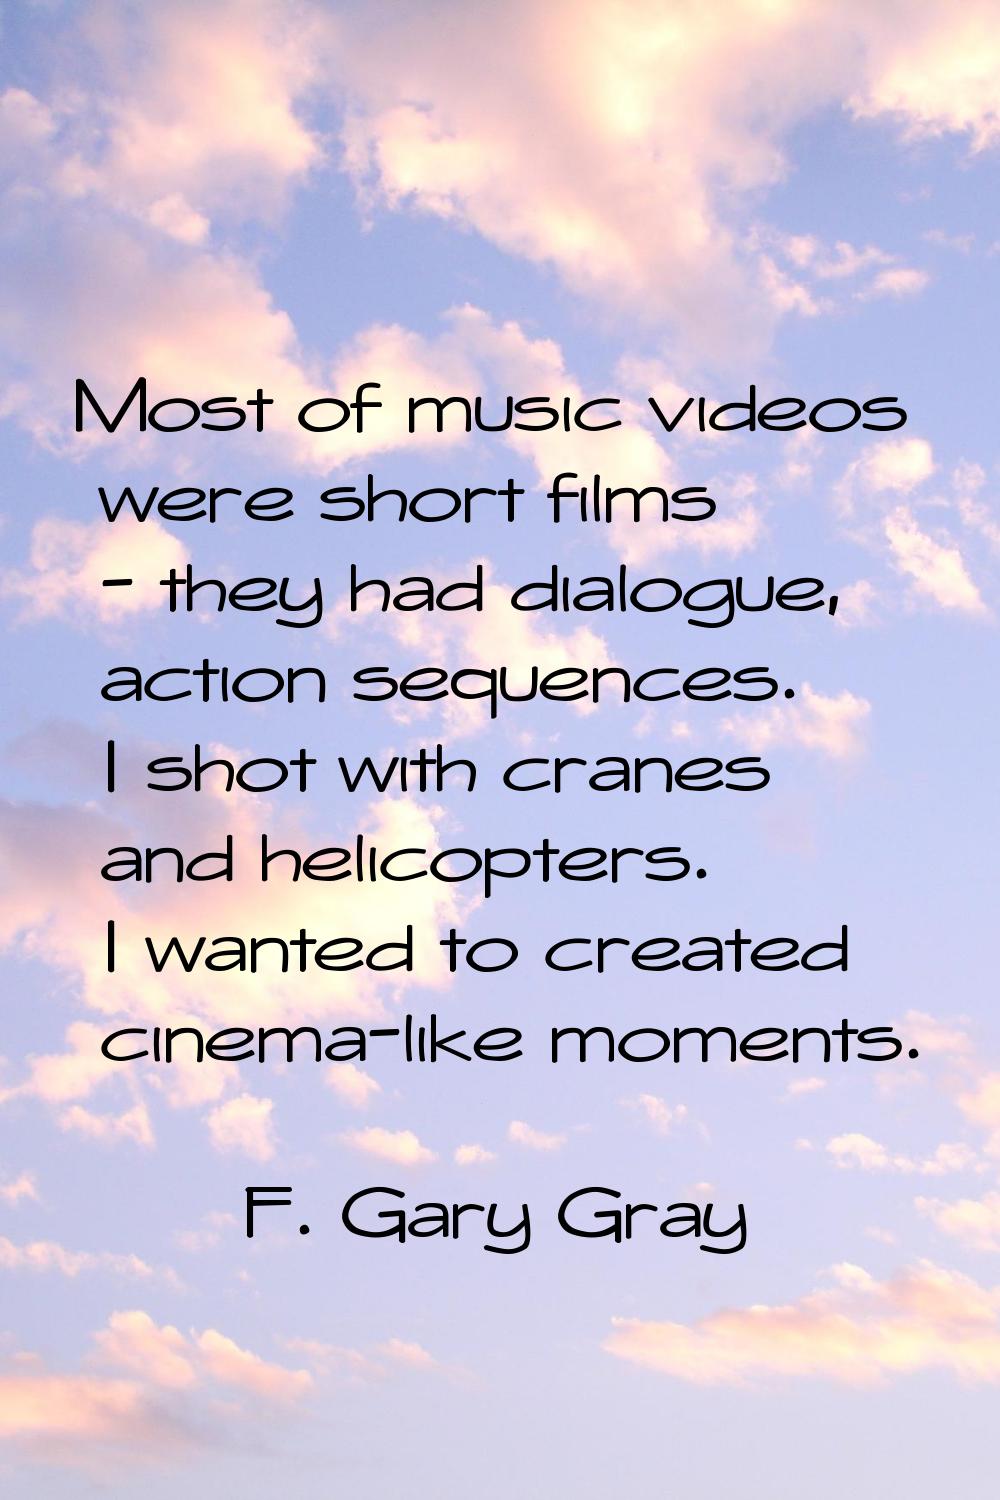 Most of music videos were short films - they had dialogue, action sequences. I shot with cranes and